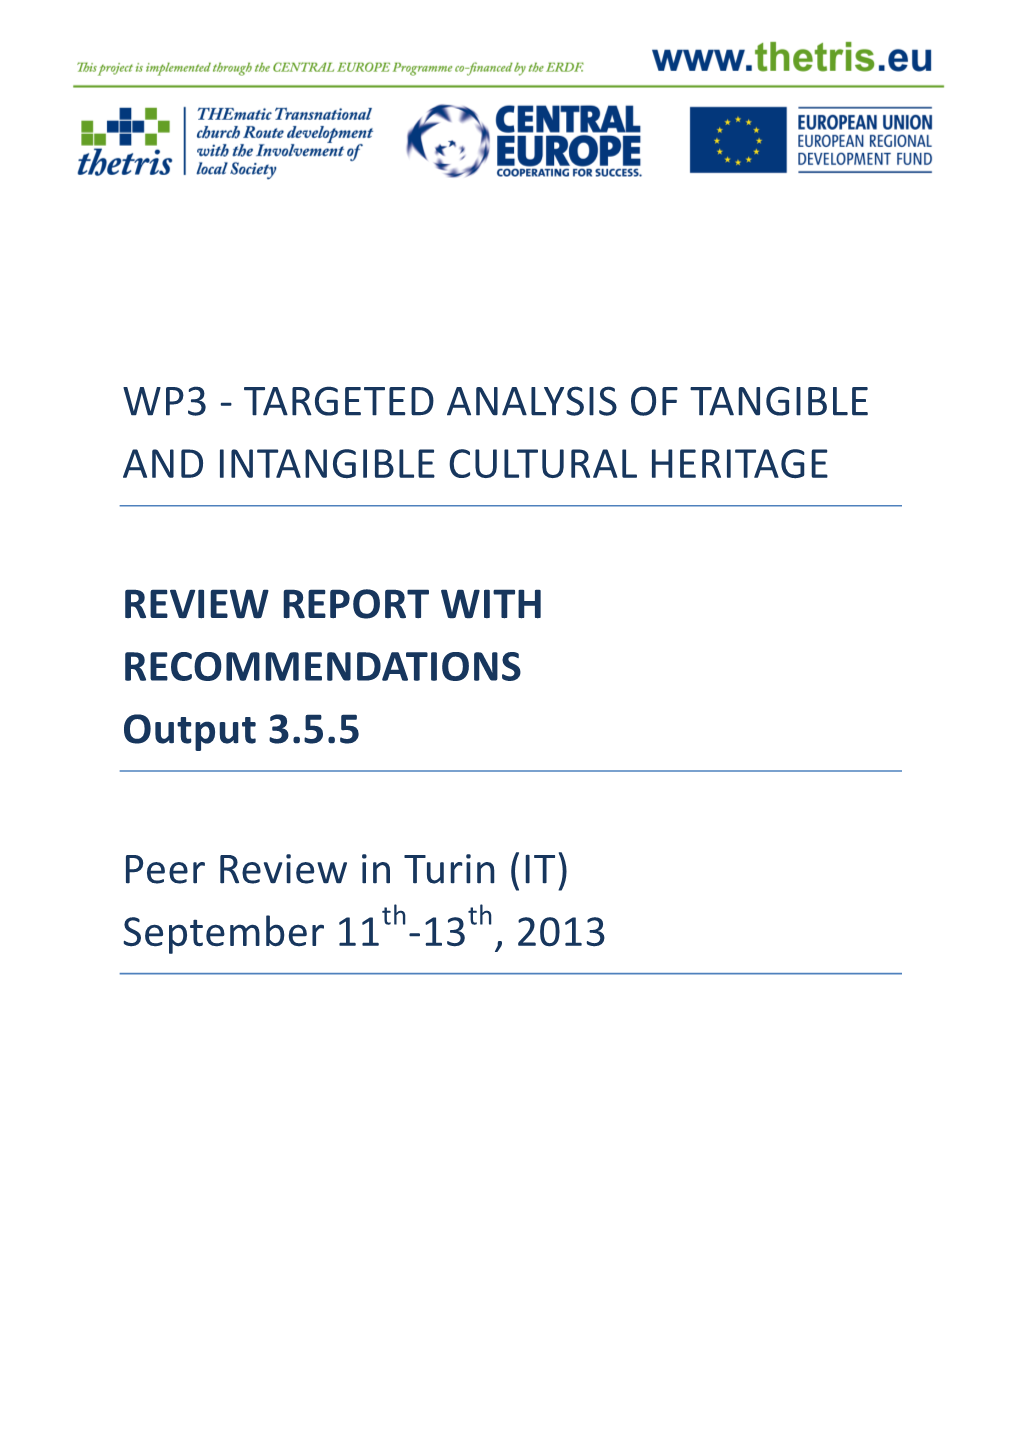 Output 3 5 5 Peer Review TURIN